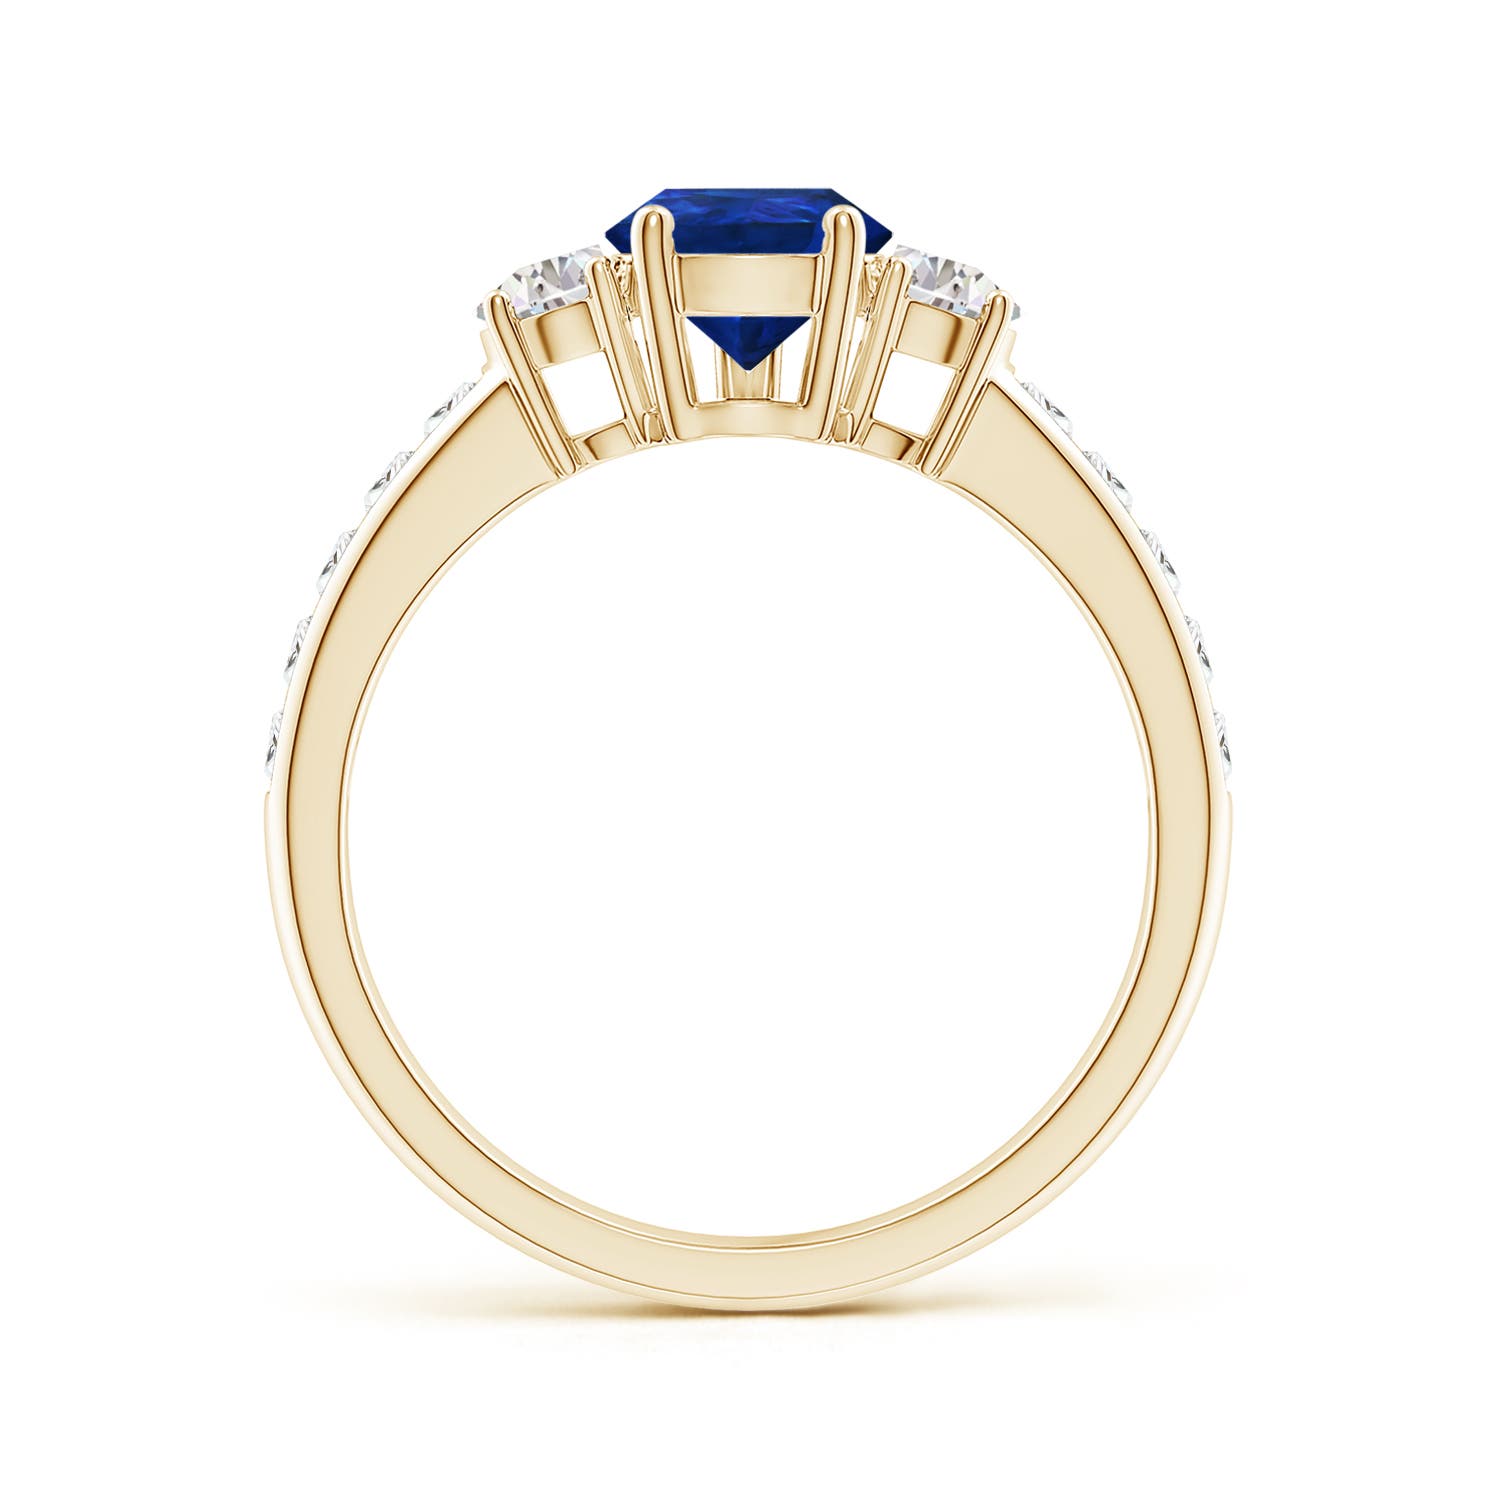 AAA - Blue Sapphire / 2.48 CT / 14 KT Yellow Gold